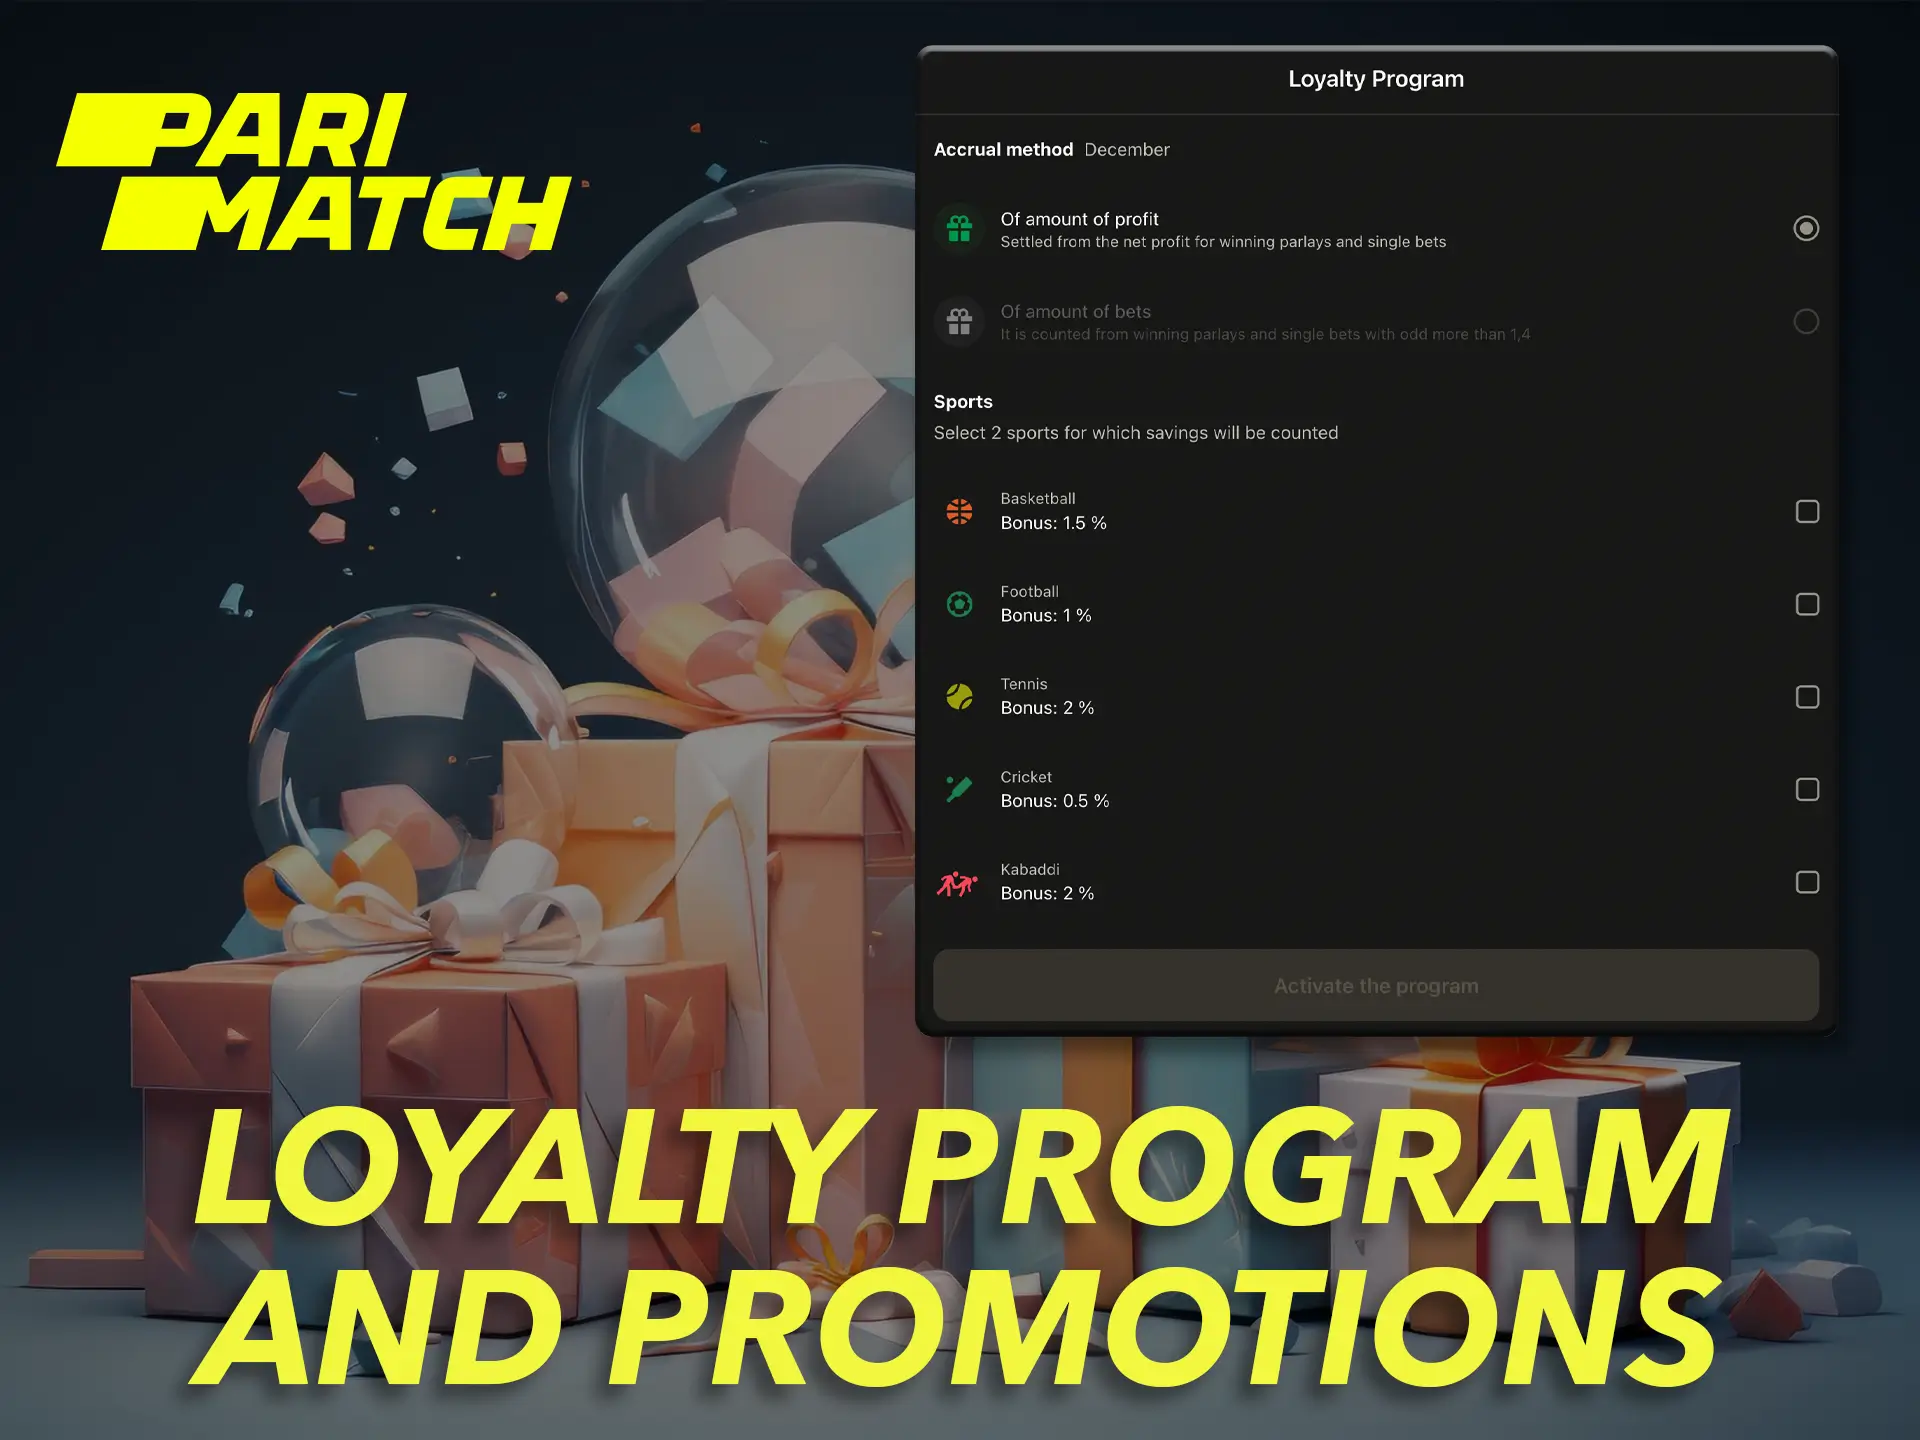 A wide range of bonuses offers Parimatch players a variety of opportunities to win.